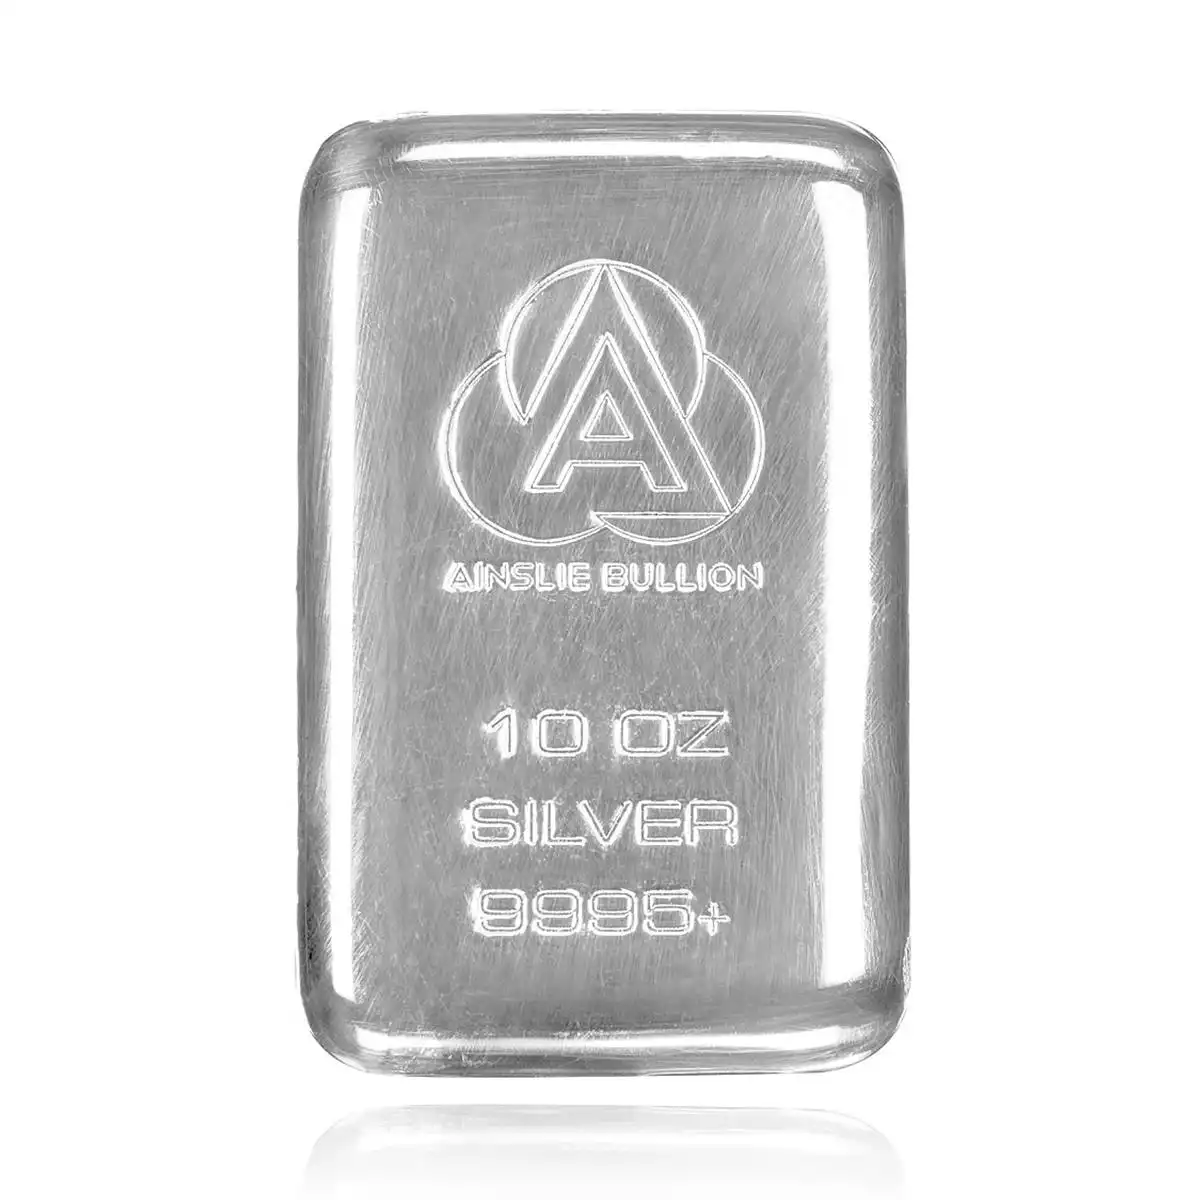 10 oz ainslie silver bullion. the 10 oz ainslie silver bar is one of our most popular bars due to its balance of tradeable size and price. along with ...